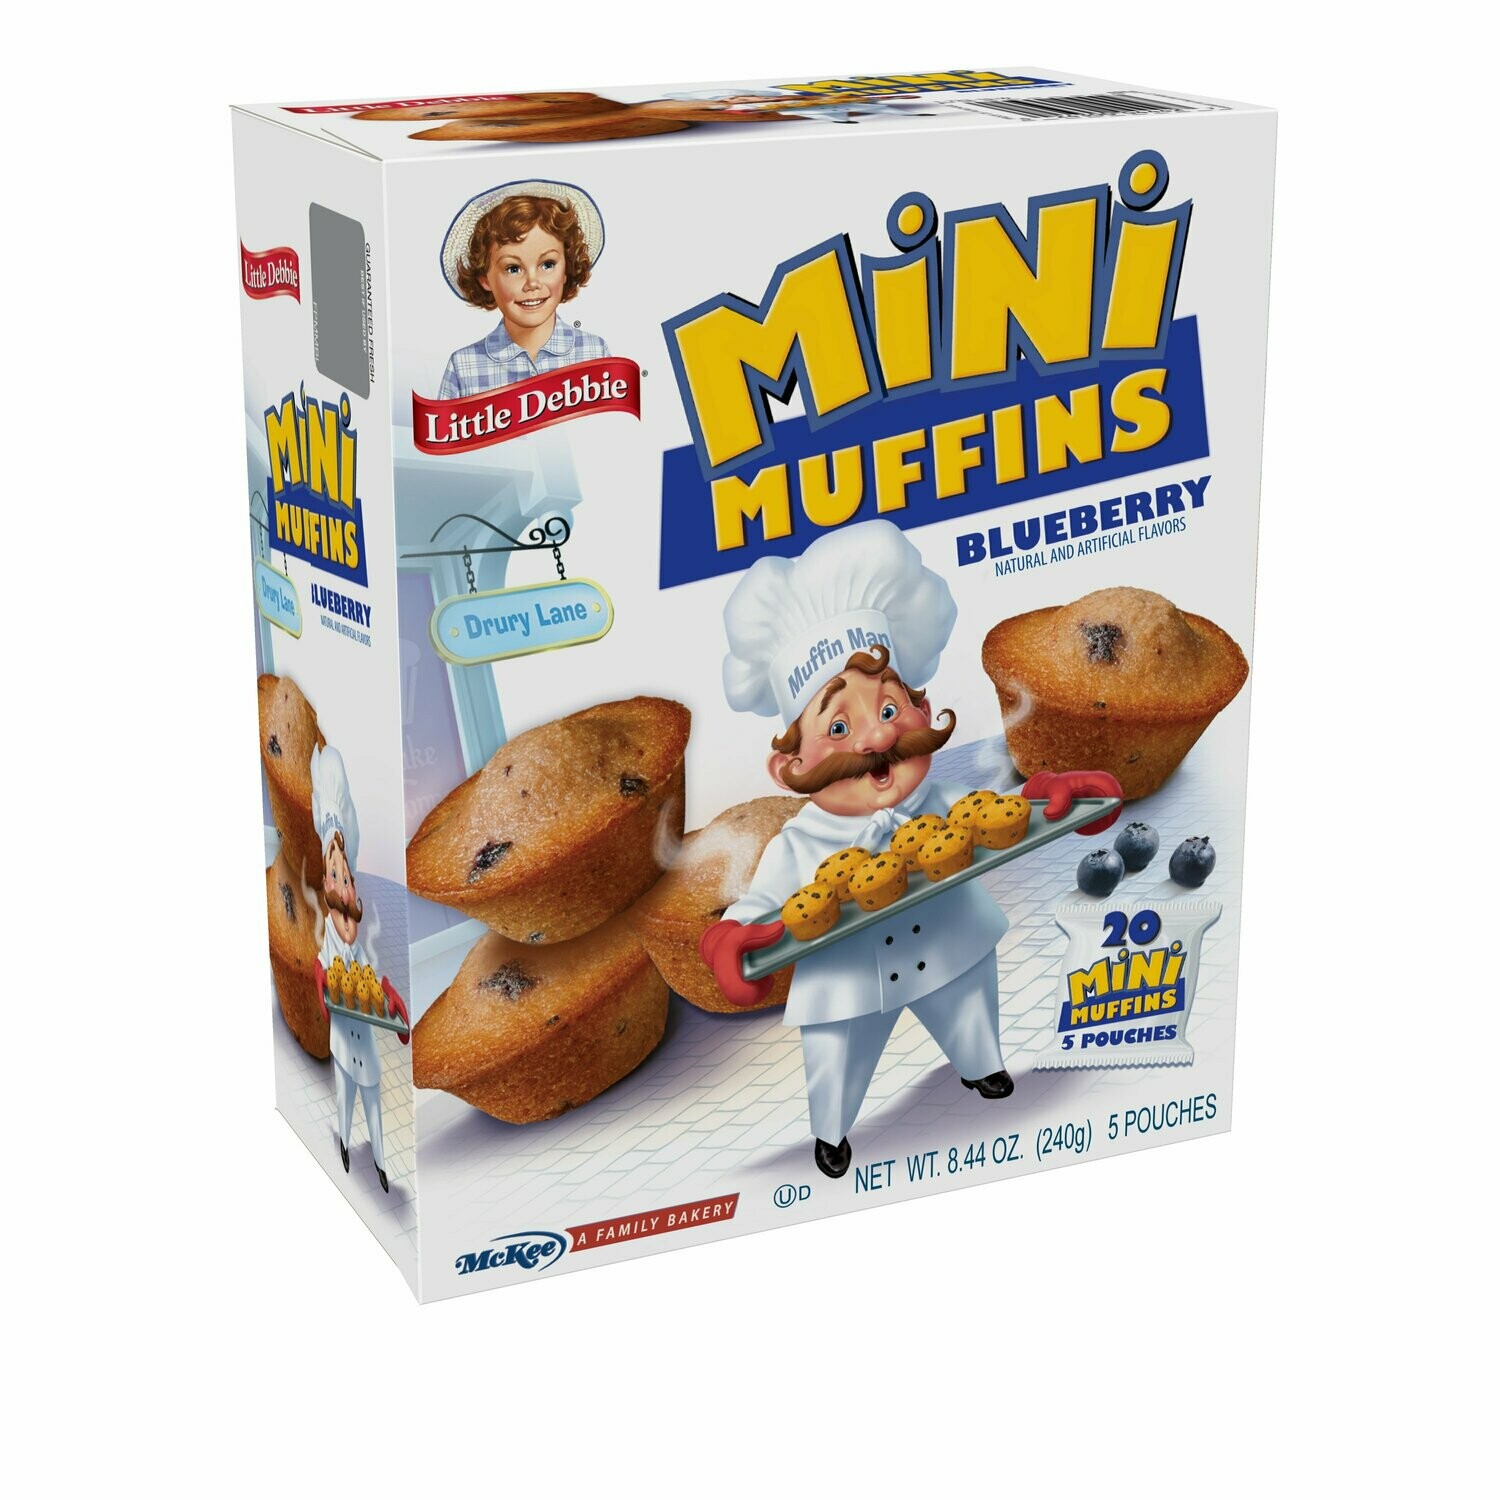 Little Debbies -    Mini Muffins, Blueberry 20ct